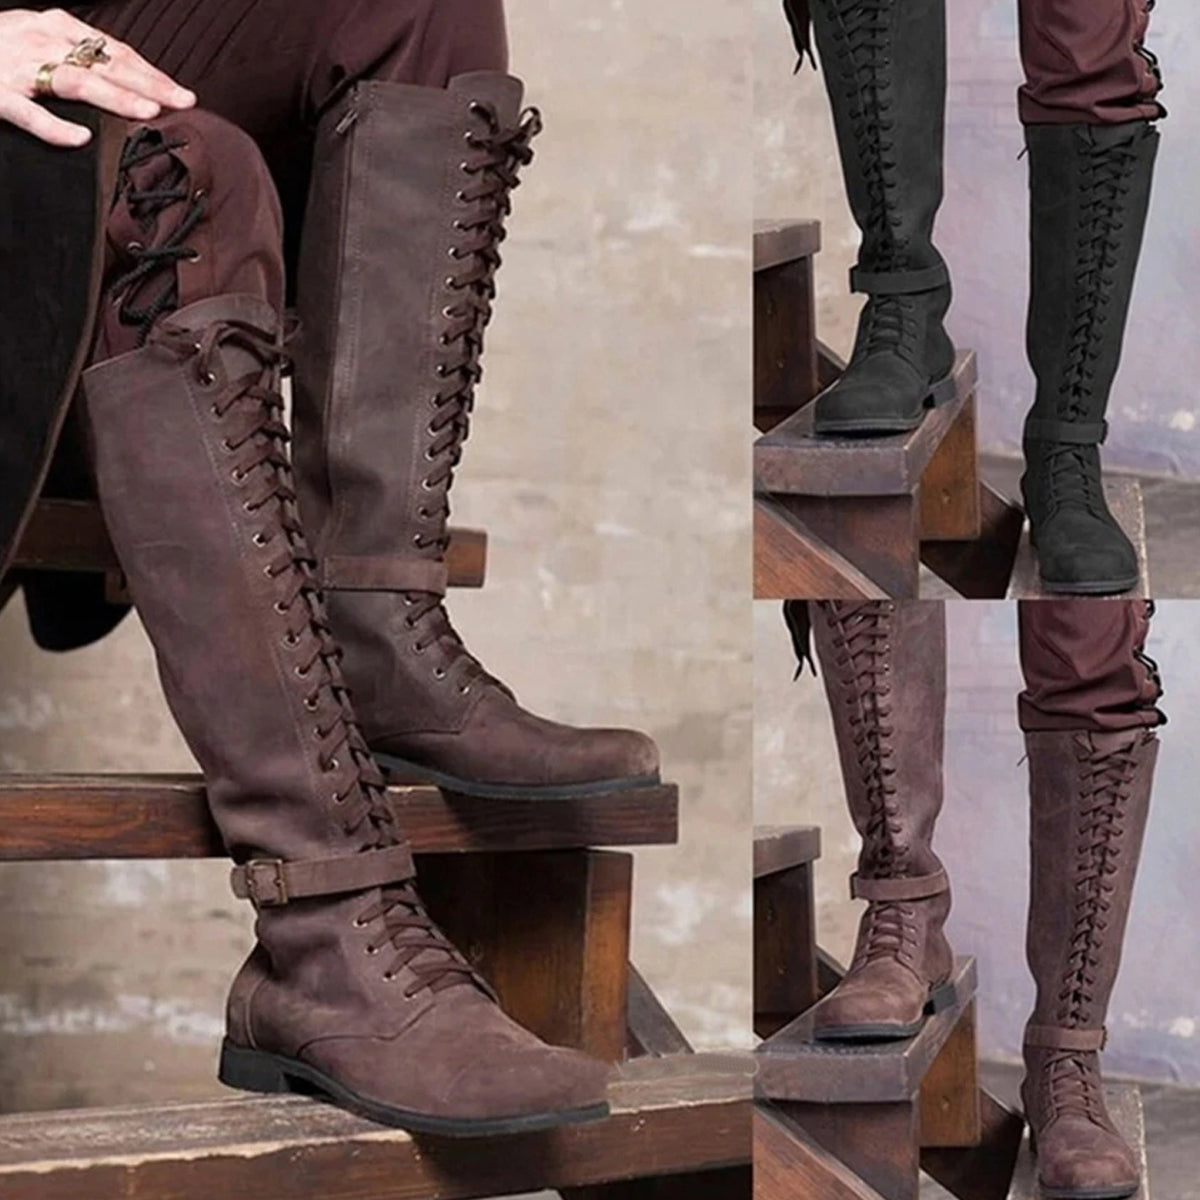 medieval leather boots